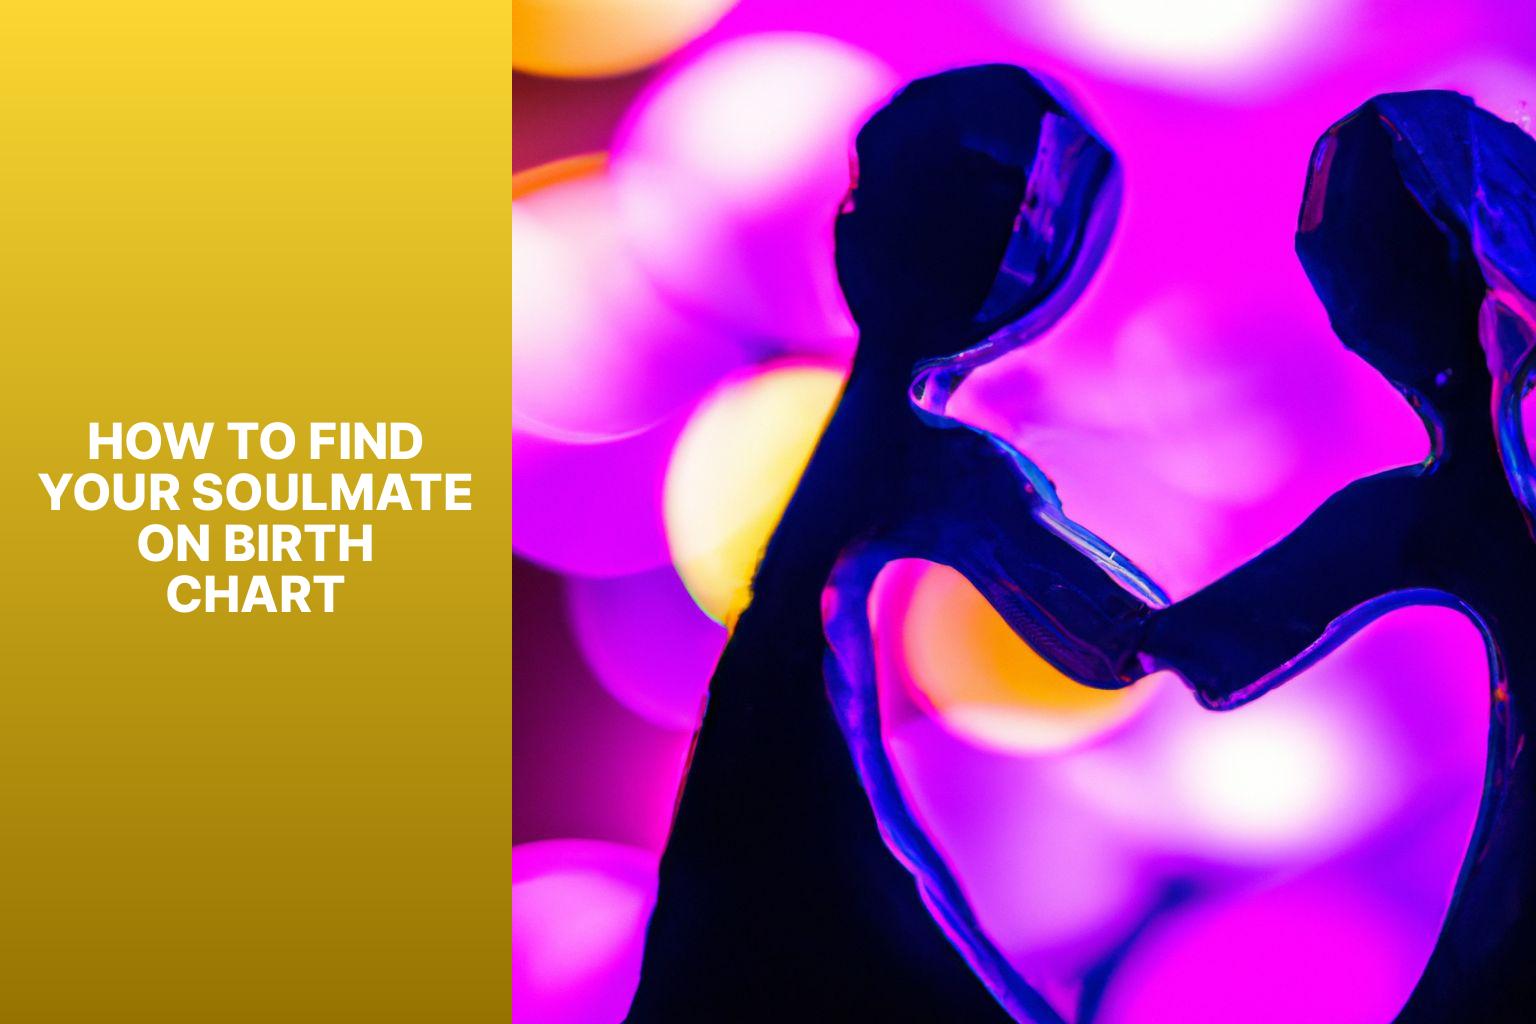 How to find your soulmate on birth chart